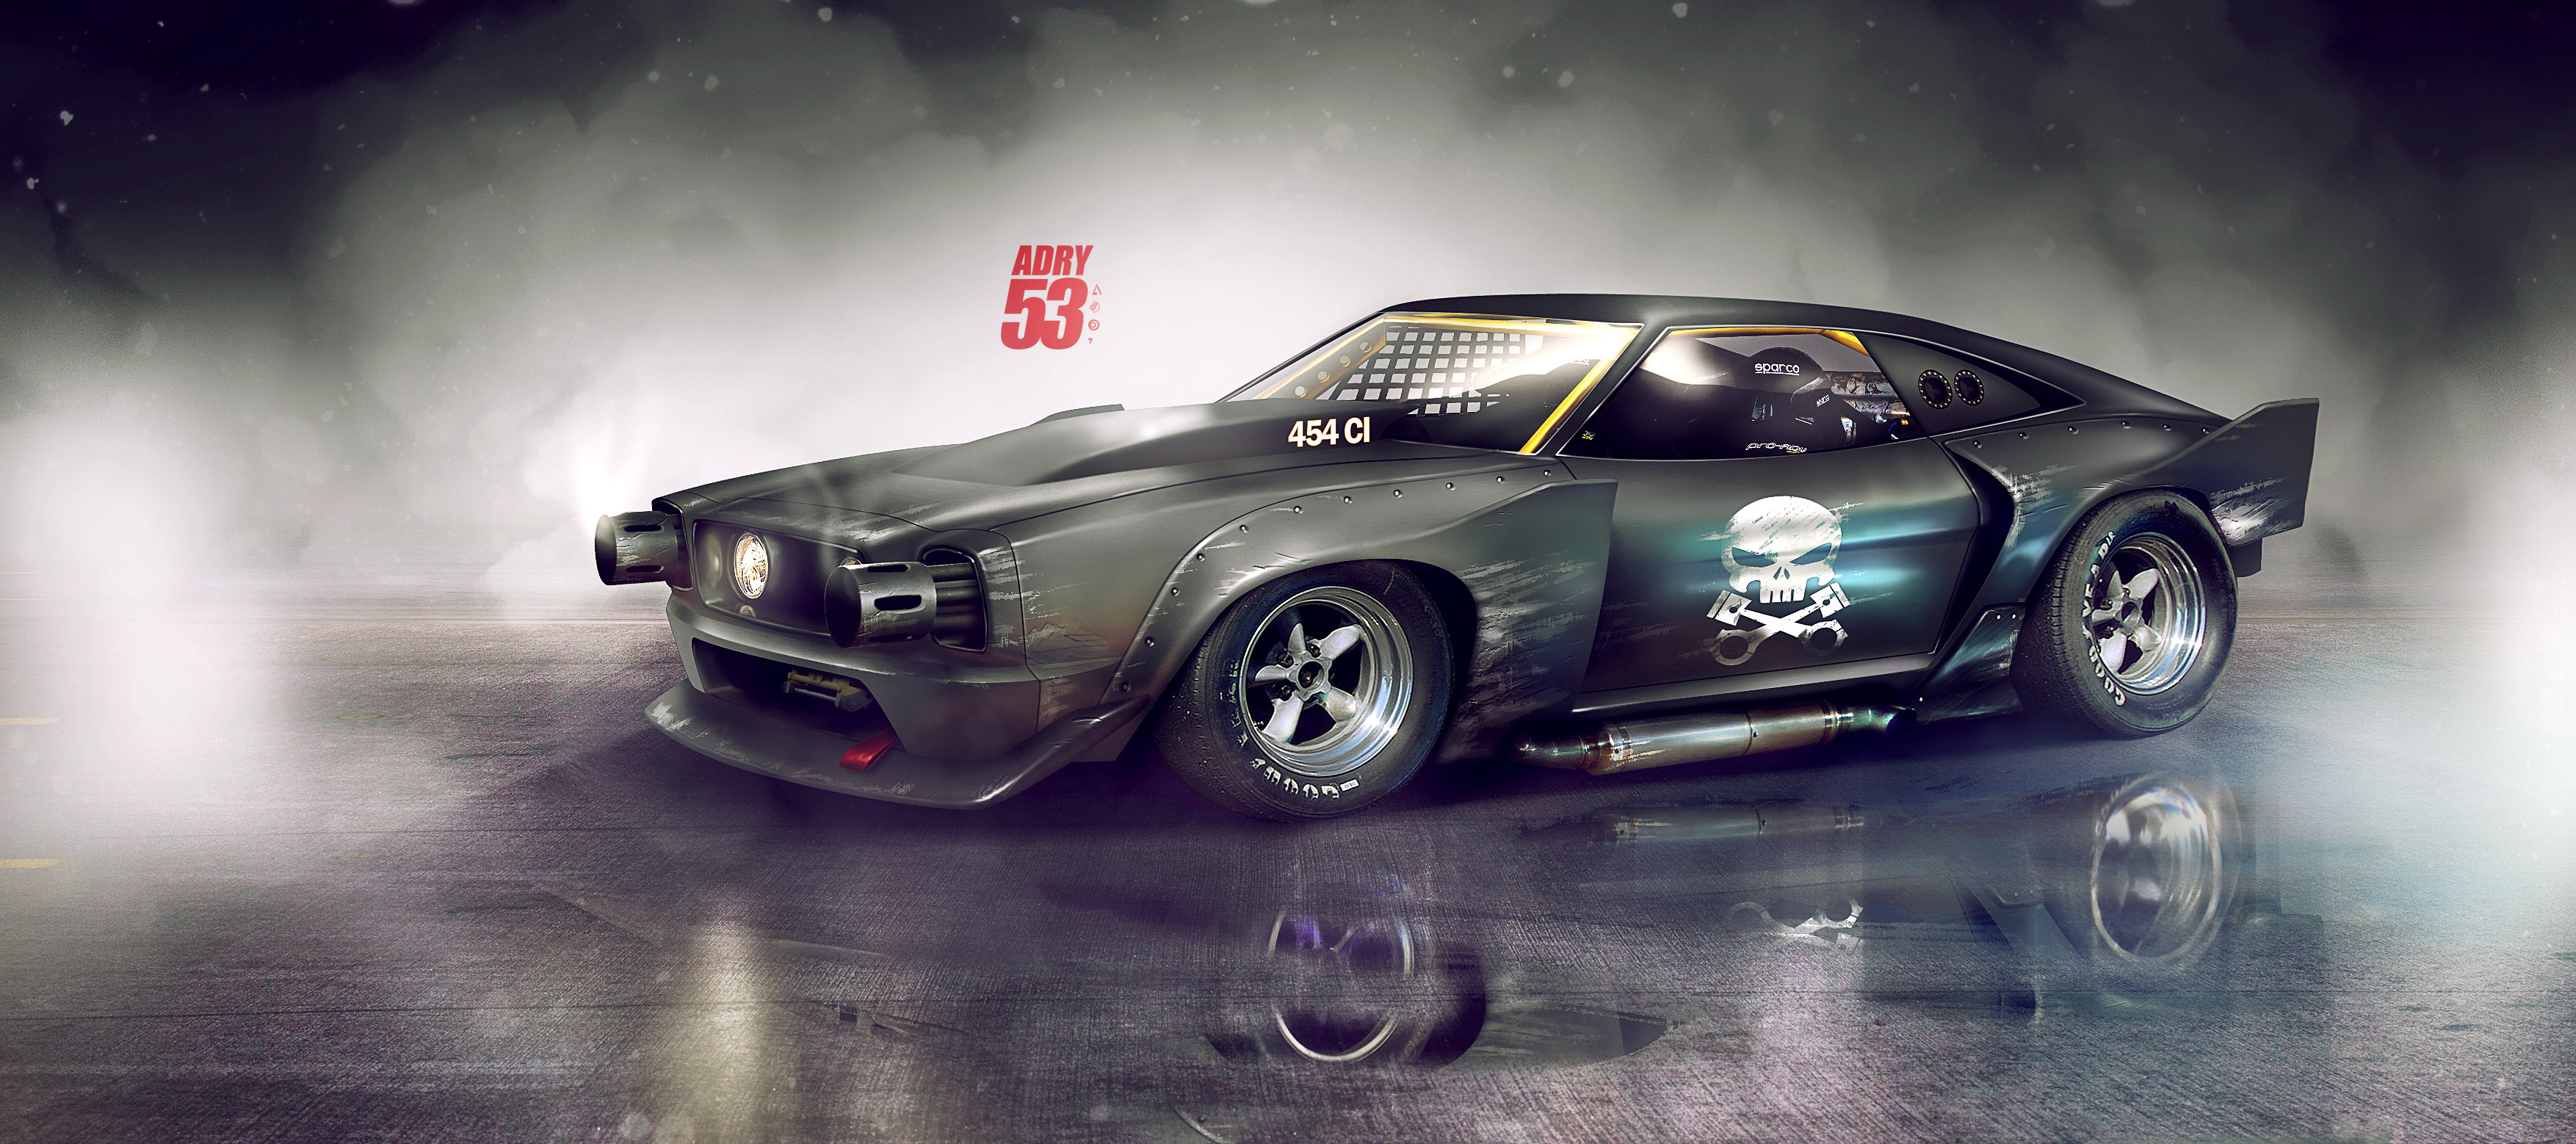 Ford Mustang Mach 1 3508x1558